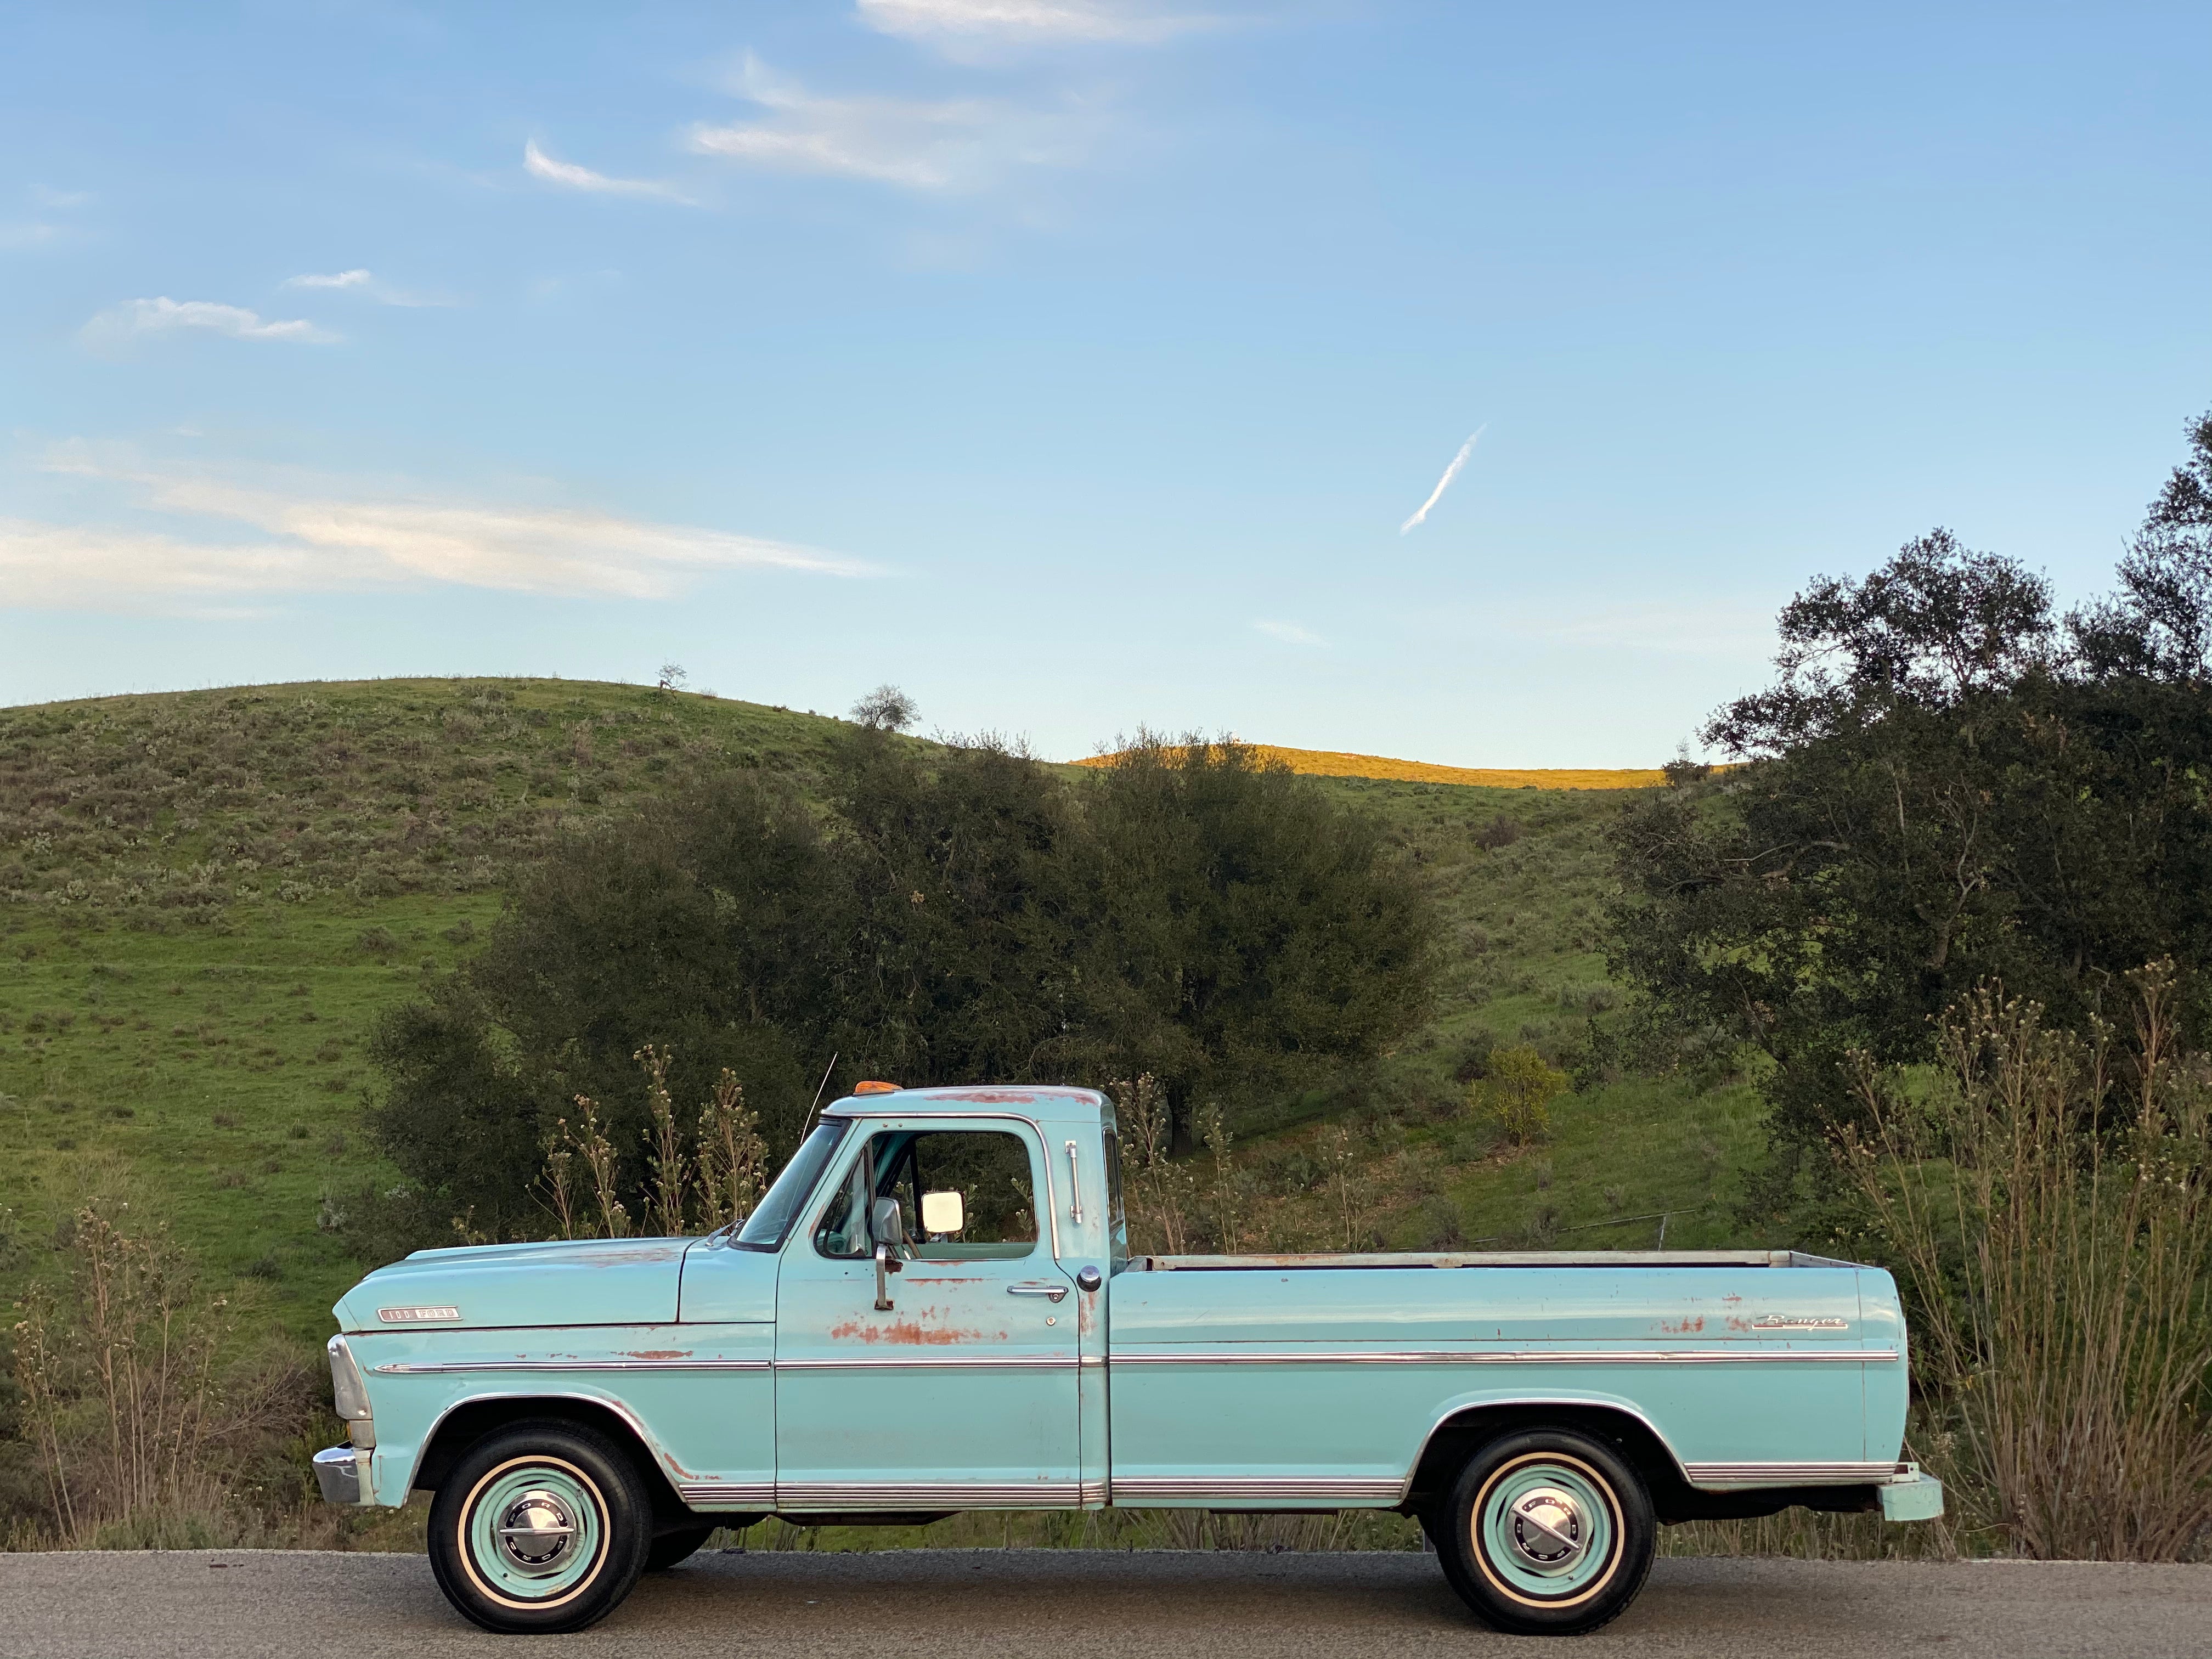 1967 Ford F-100 Frost Turquoise FINE ART PRINT